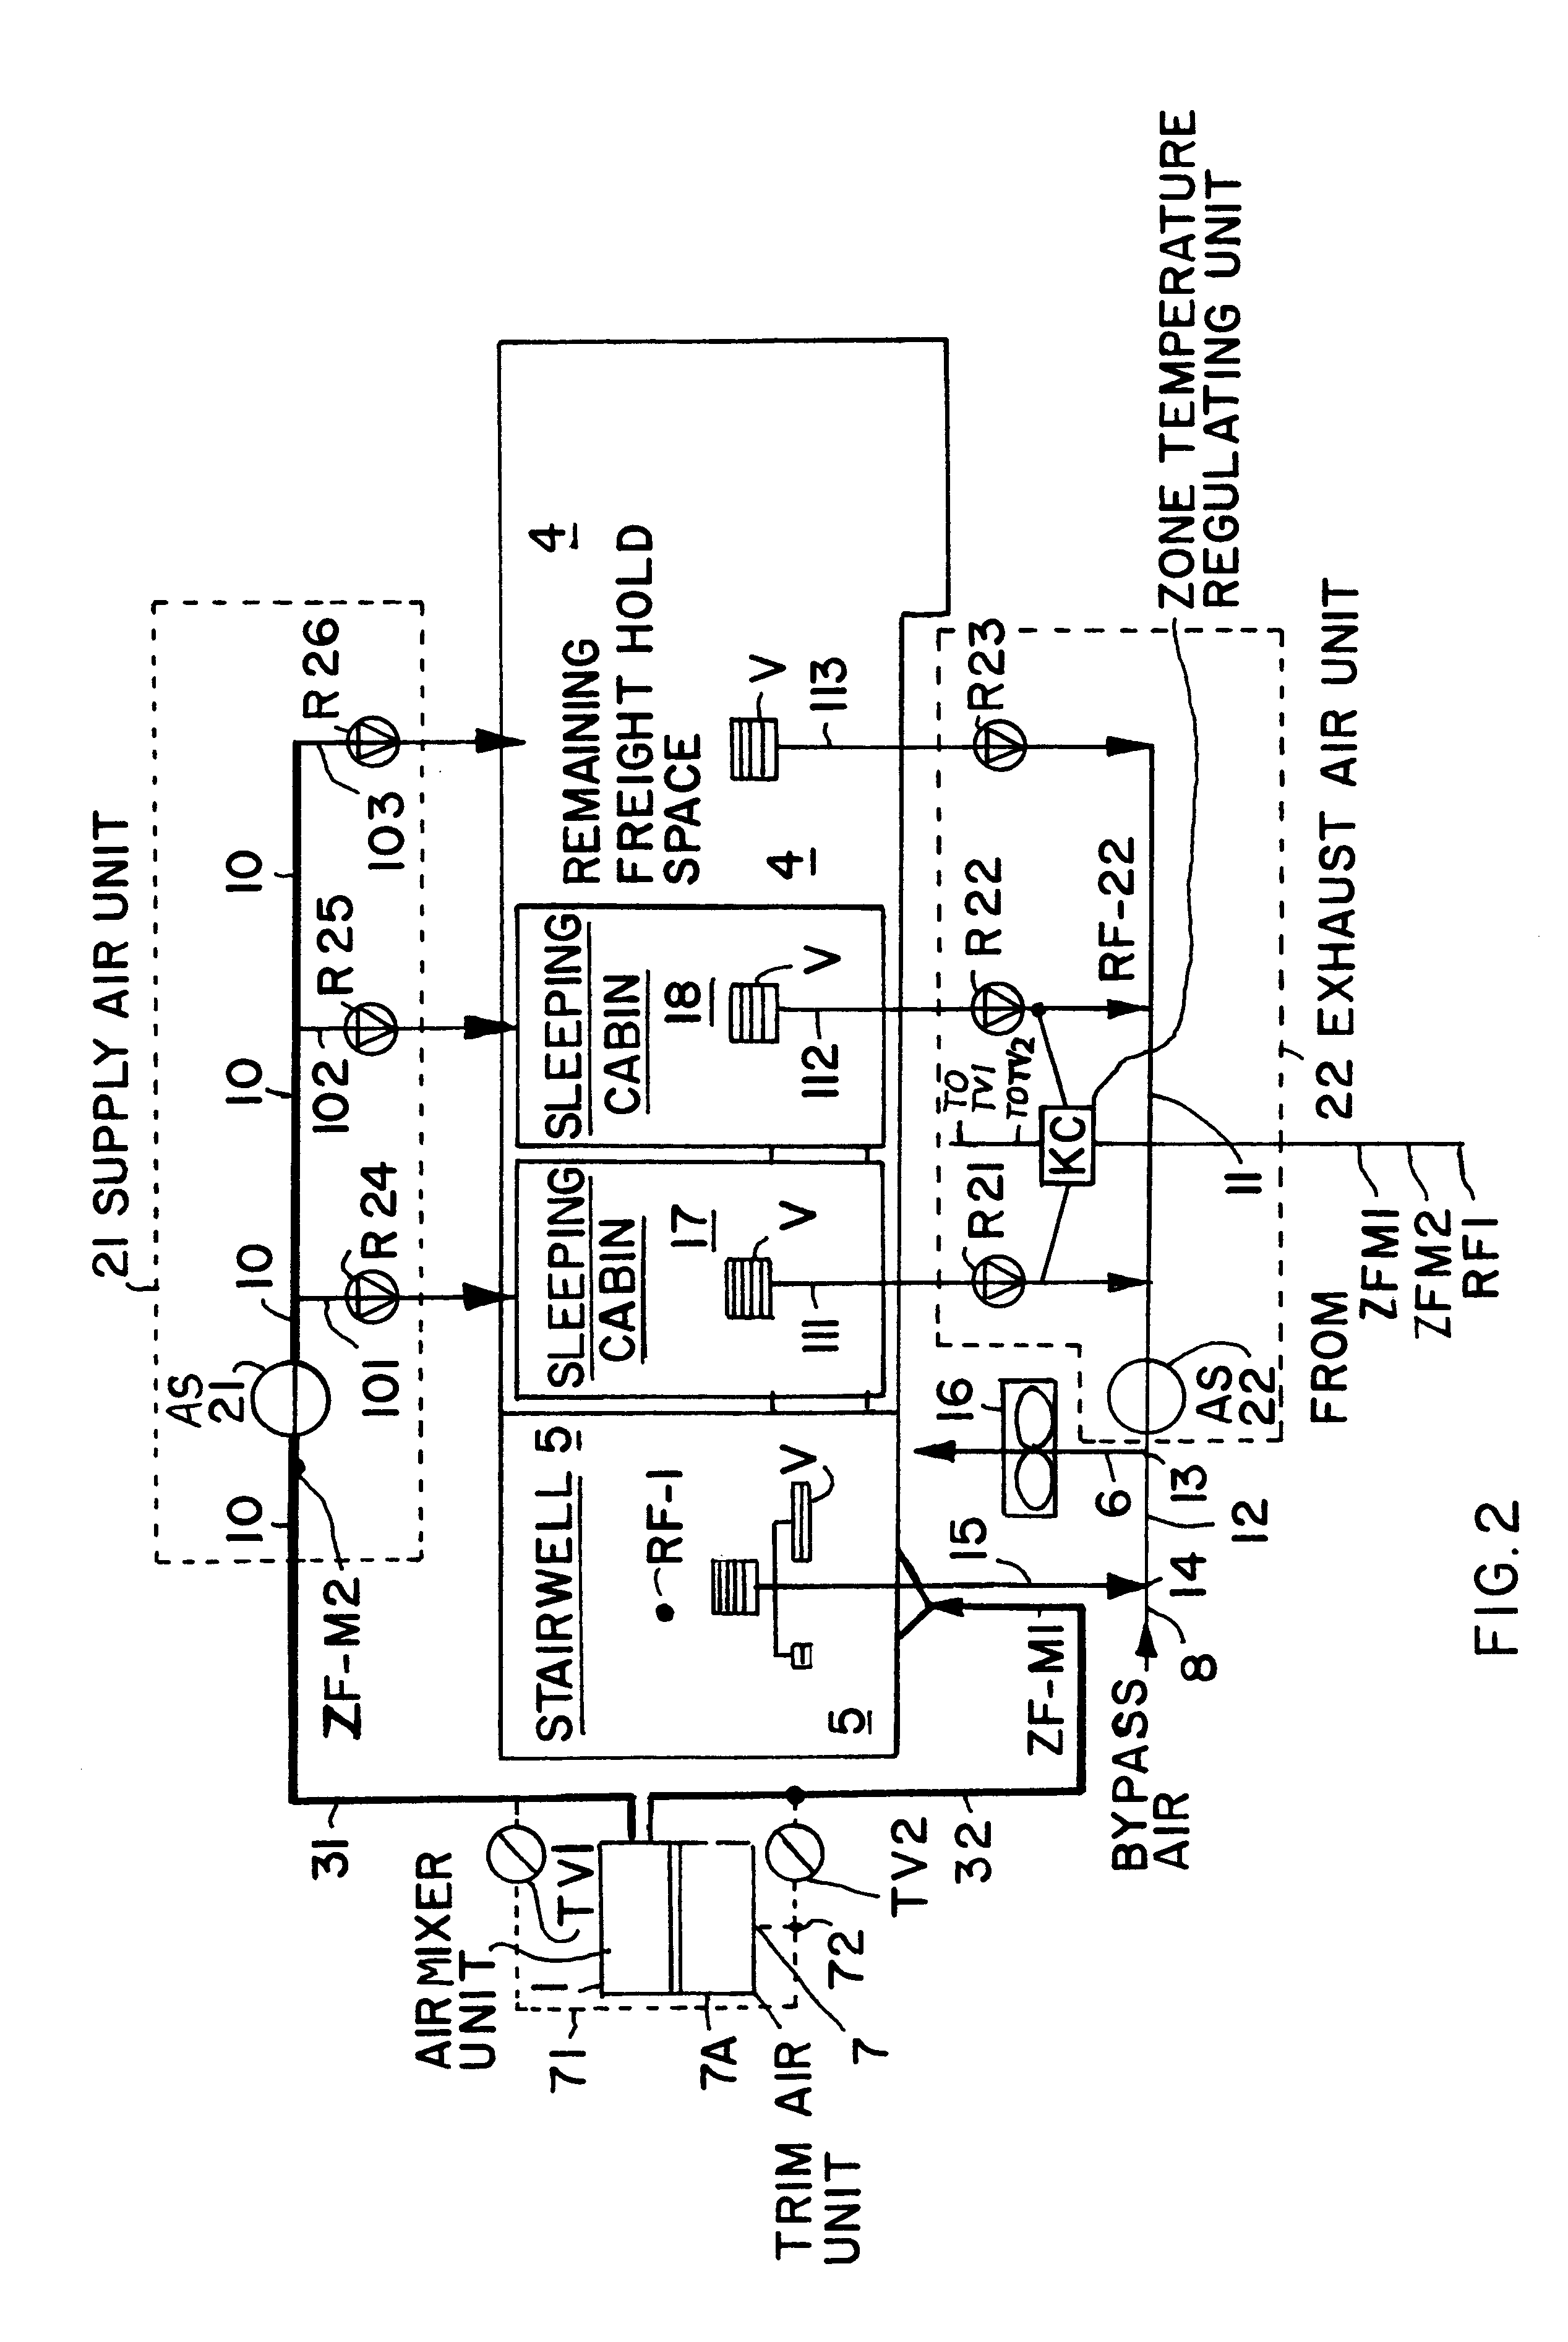 Air-conditioning system for below-deck areas of a passenger aircraft